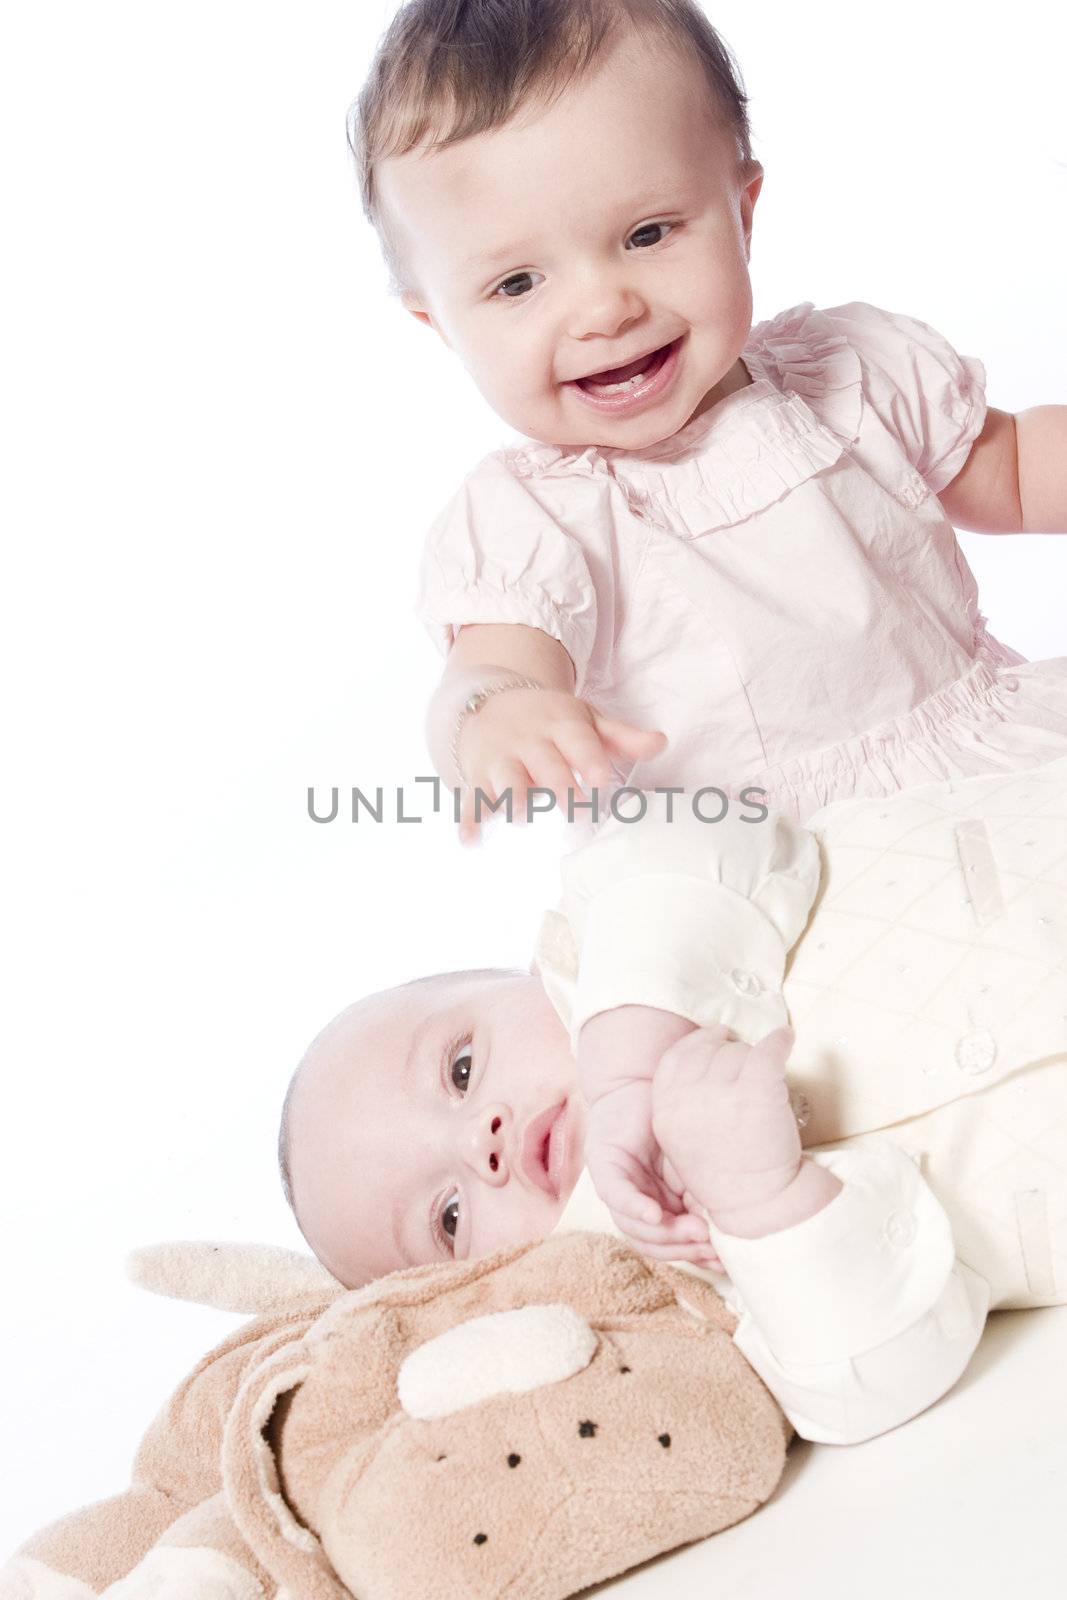 Toddler playing with baby by DNFStyle